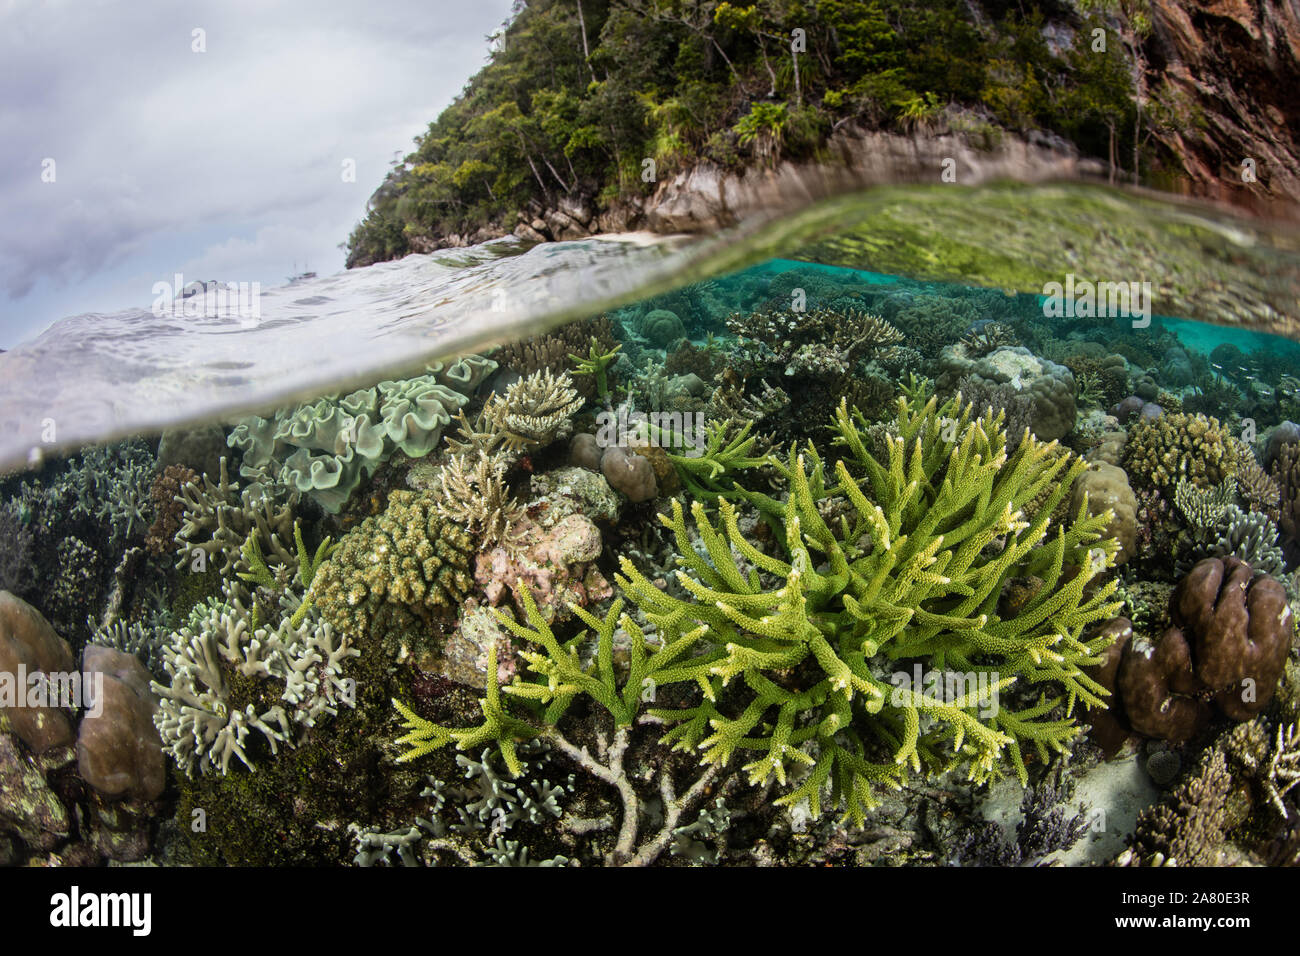 Healthy coral reefs thrive amid the beautiful, tropical seascape in Raja Ampat, Indonesia. This remote region is known for its extraordinary diversity. Stock Photo